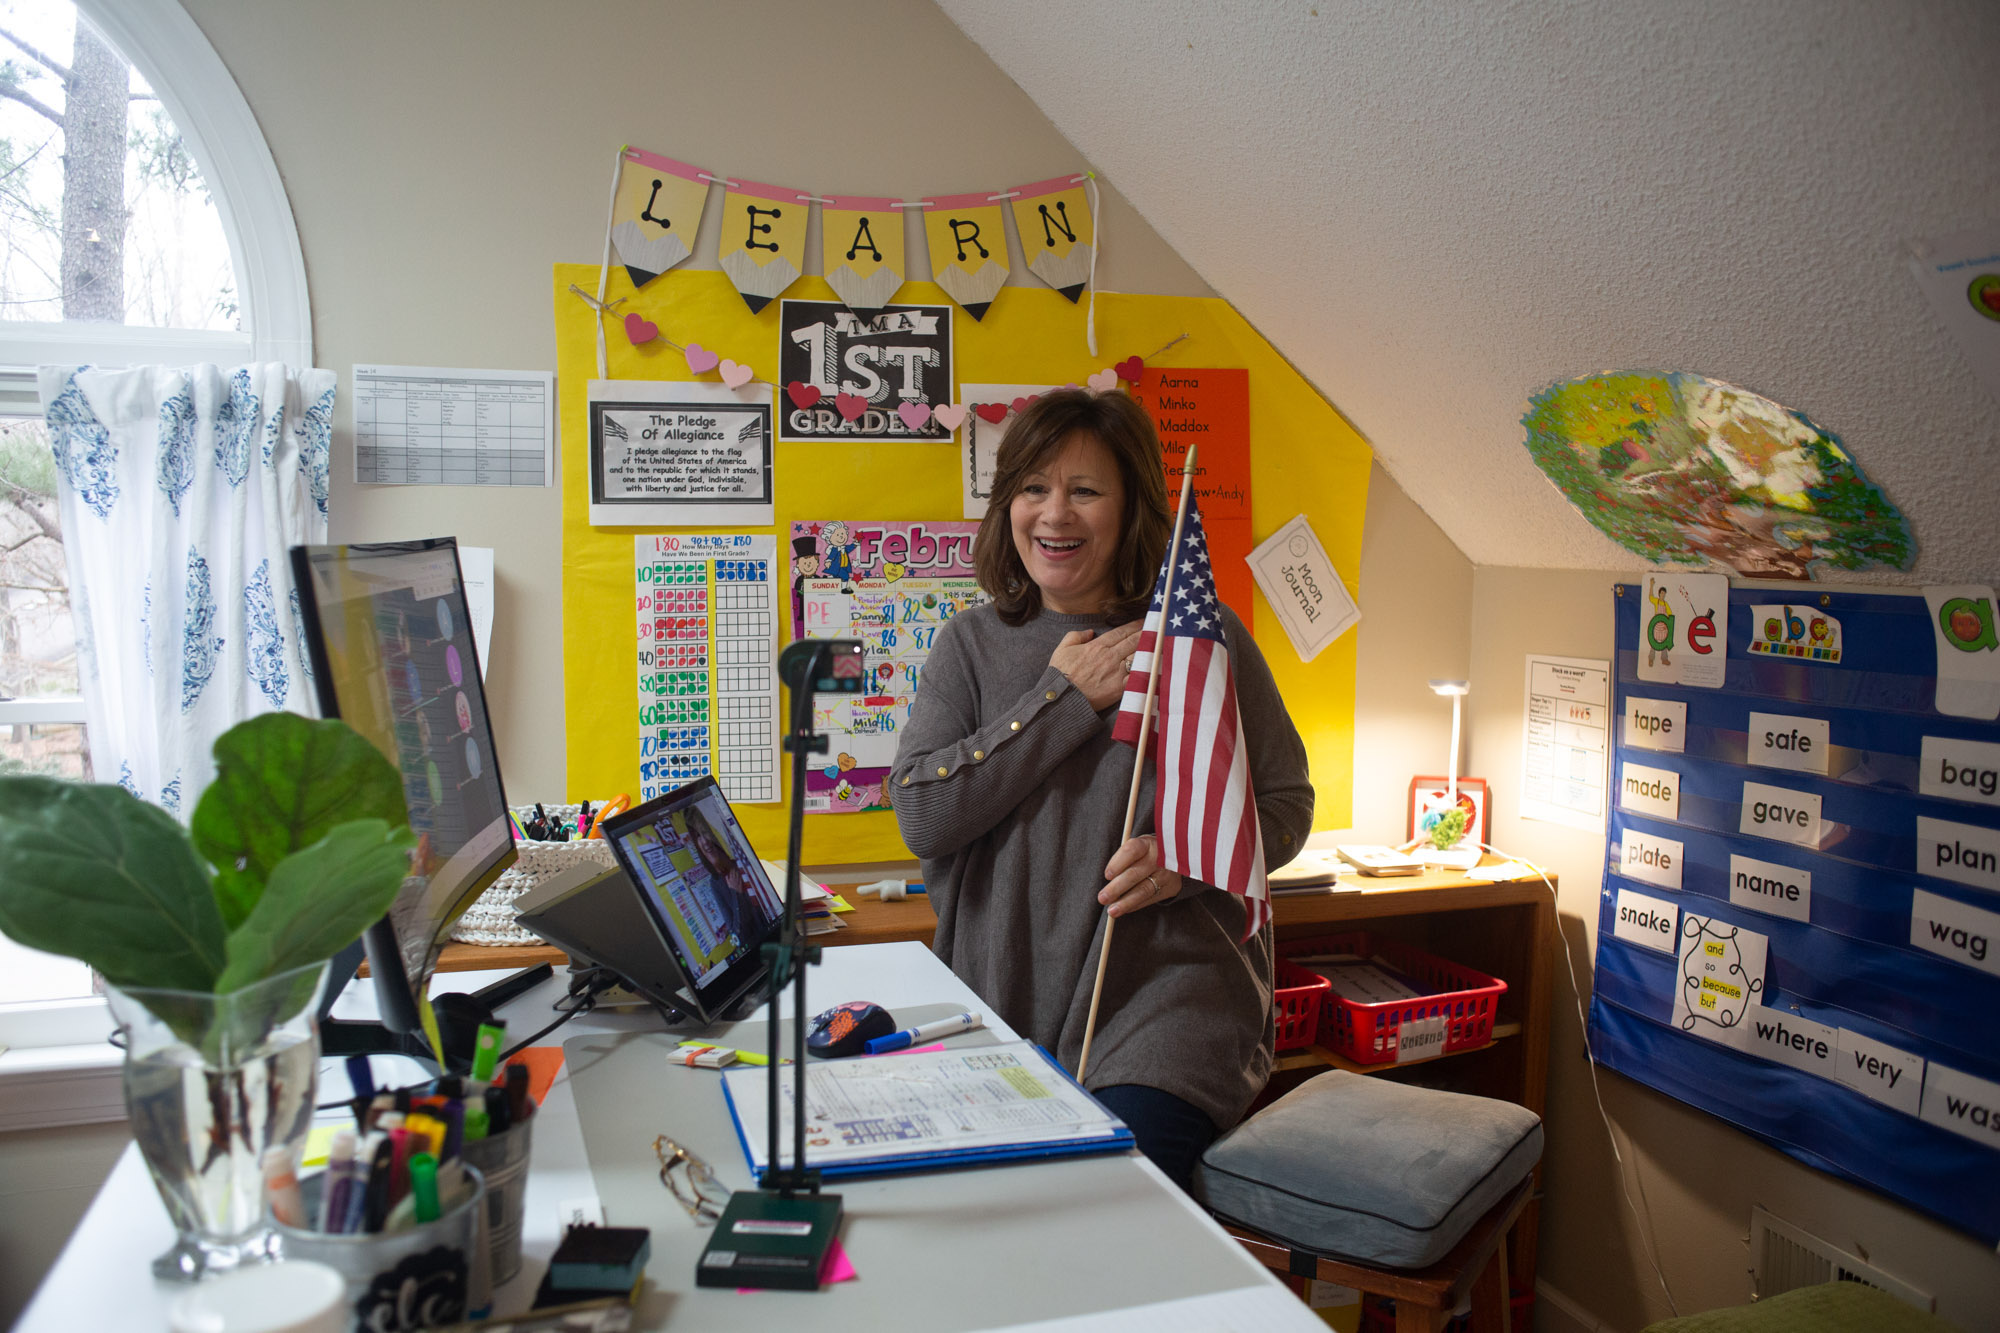 Woman holds an American flag as she puts her hand over her heart and conducts "The Pledge of Allegiance" over web-cam.